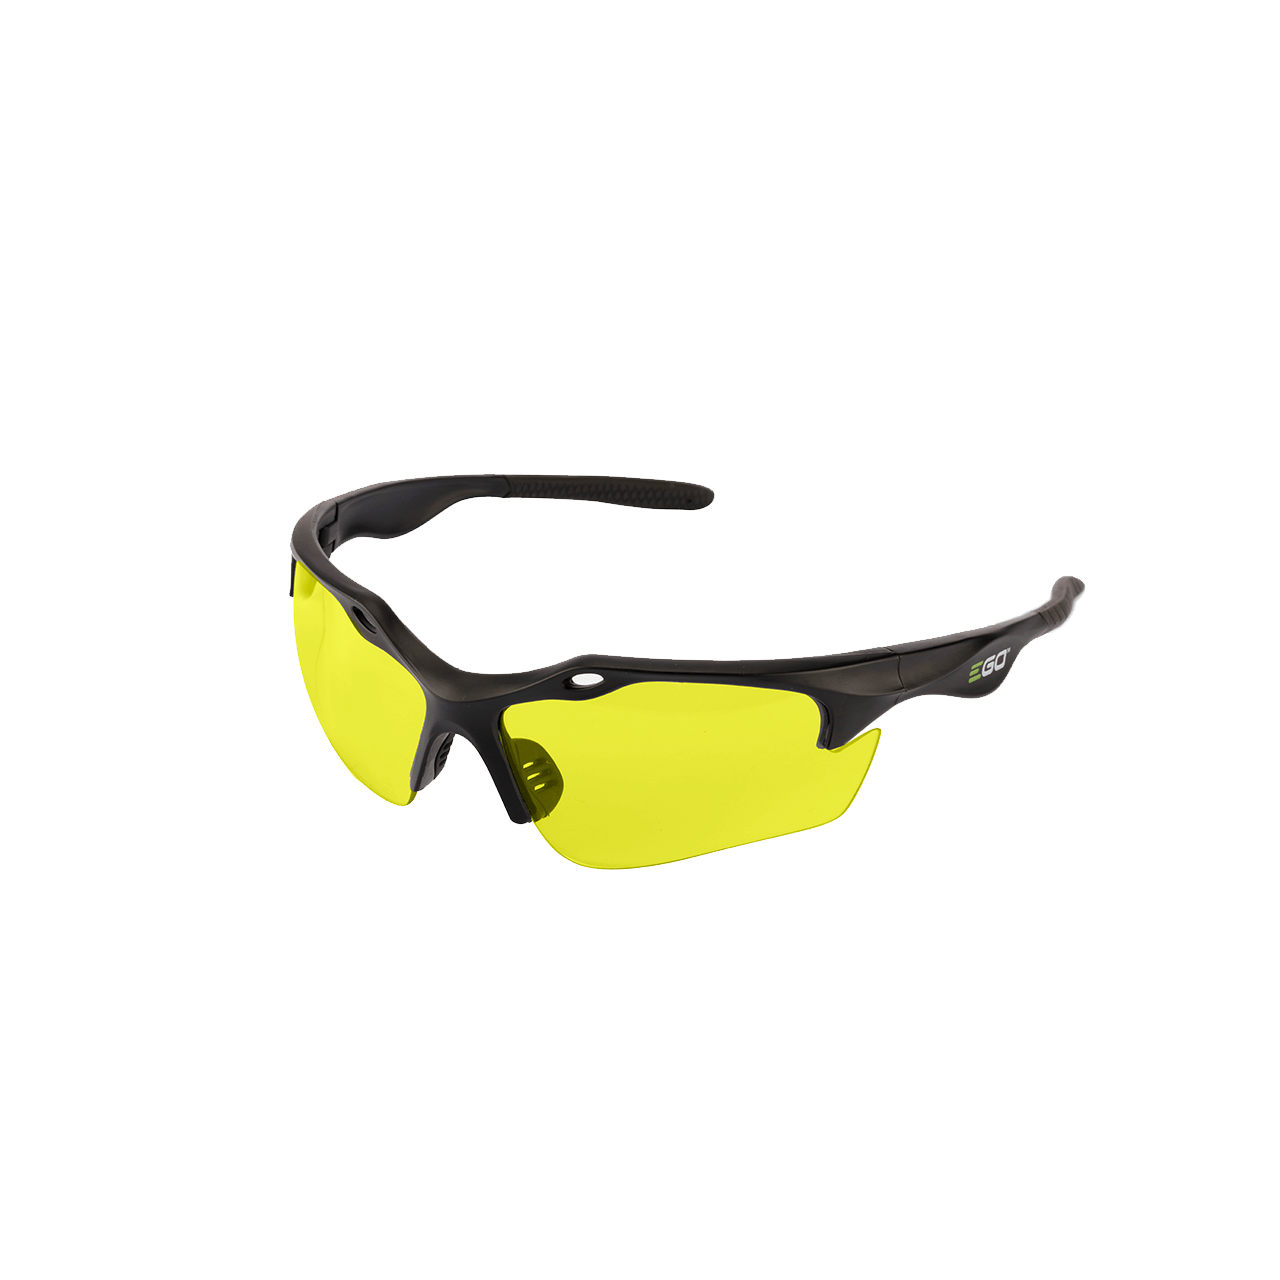 EGO POWER+ GS003 Essential Yellow Safety Glasses.